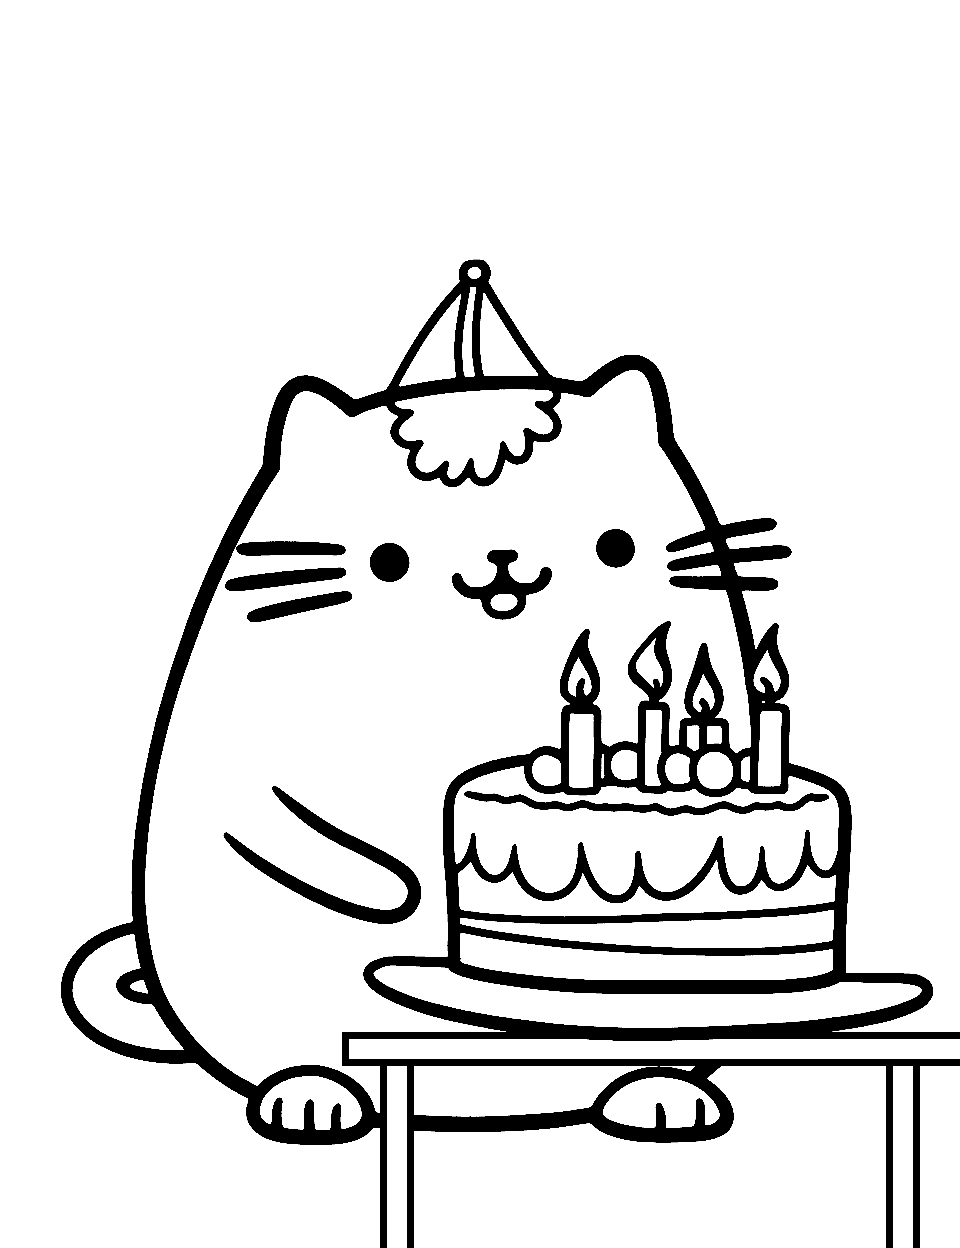 Birthday Celebrations Coloring Page - Pusheen wearing a birthday hat beside a large cake.